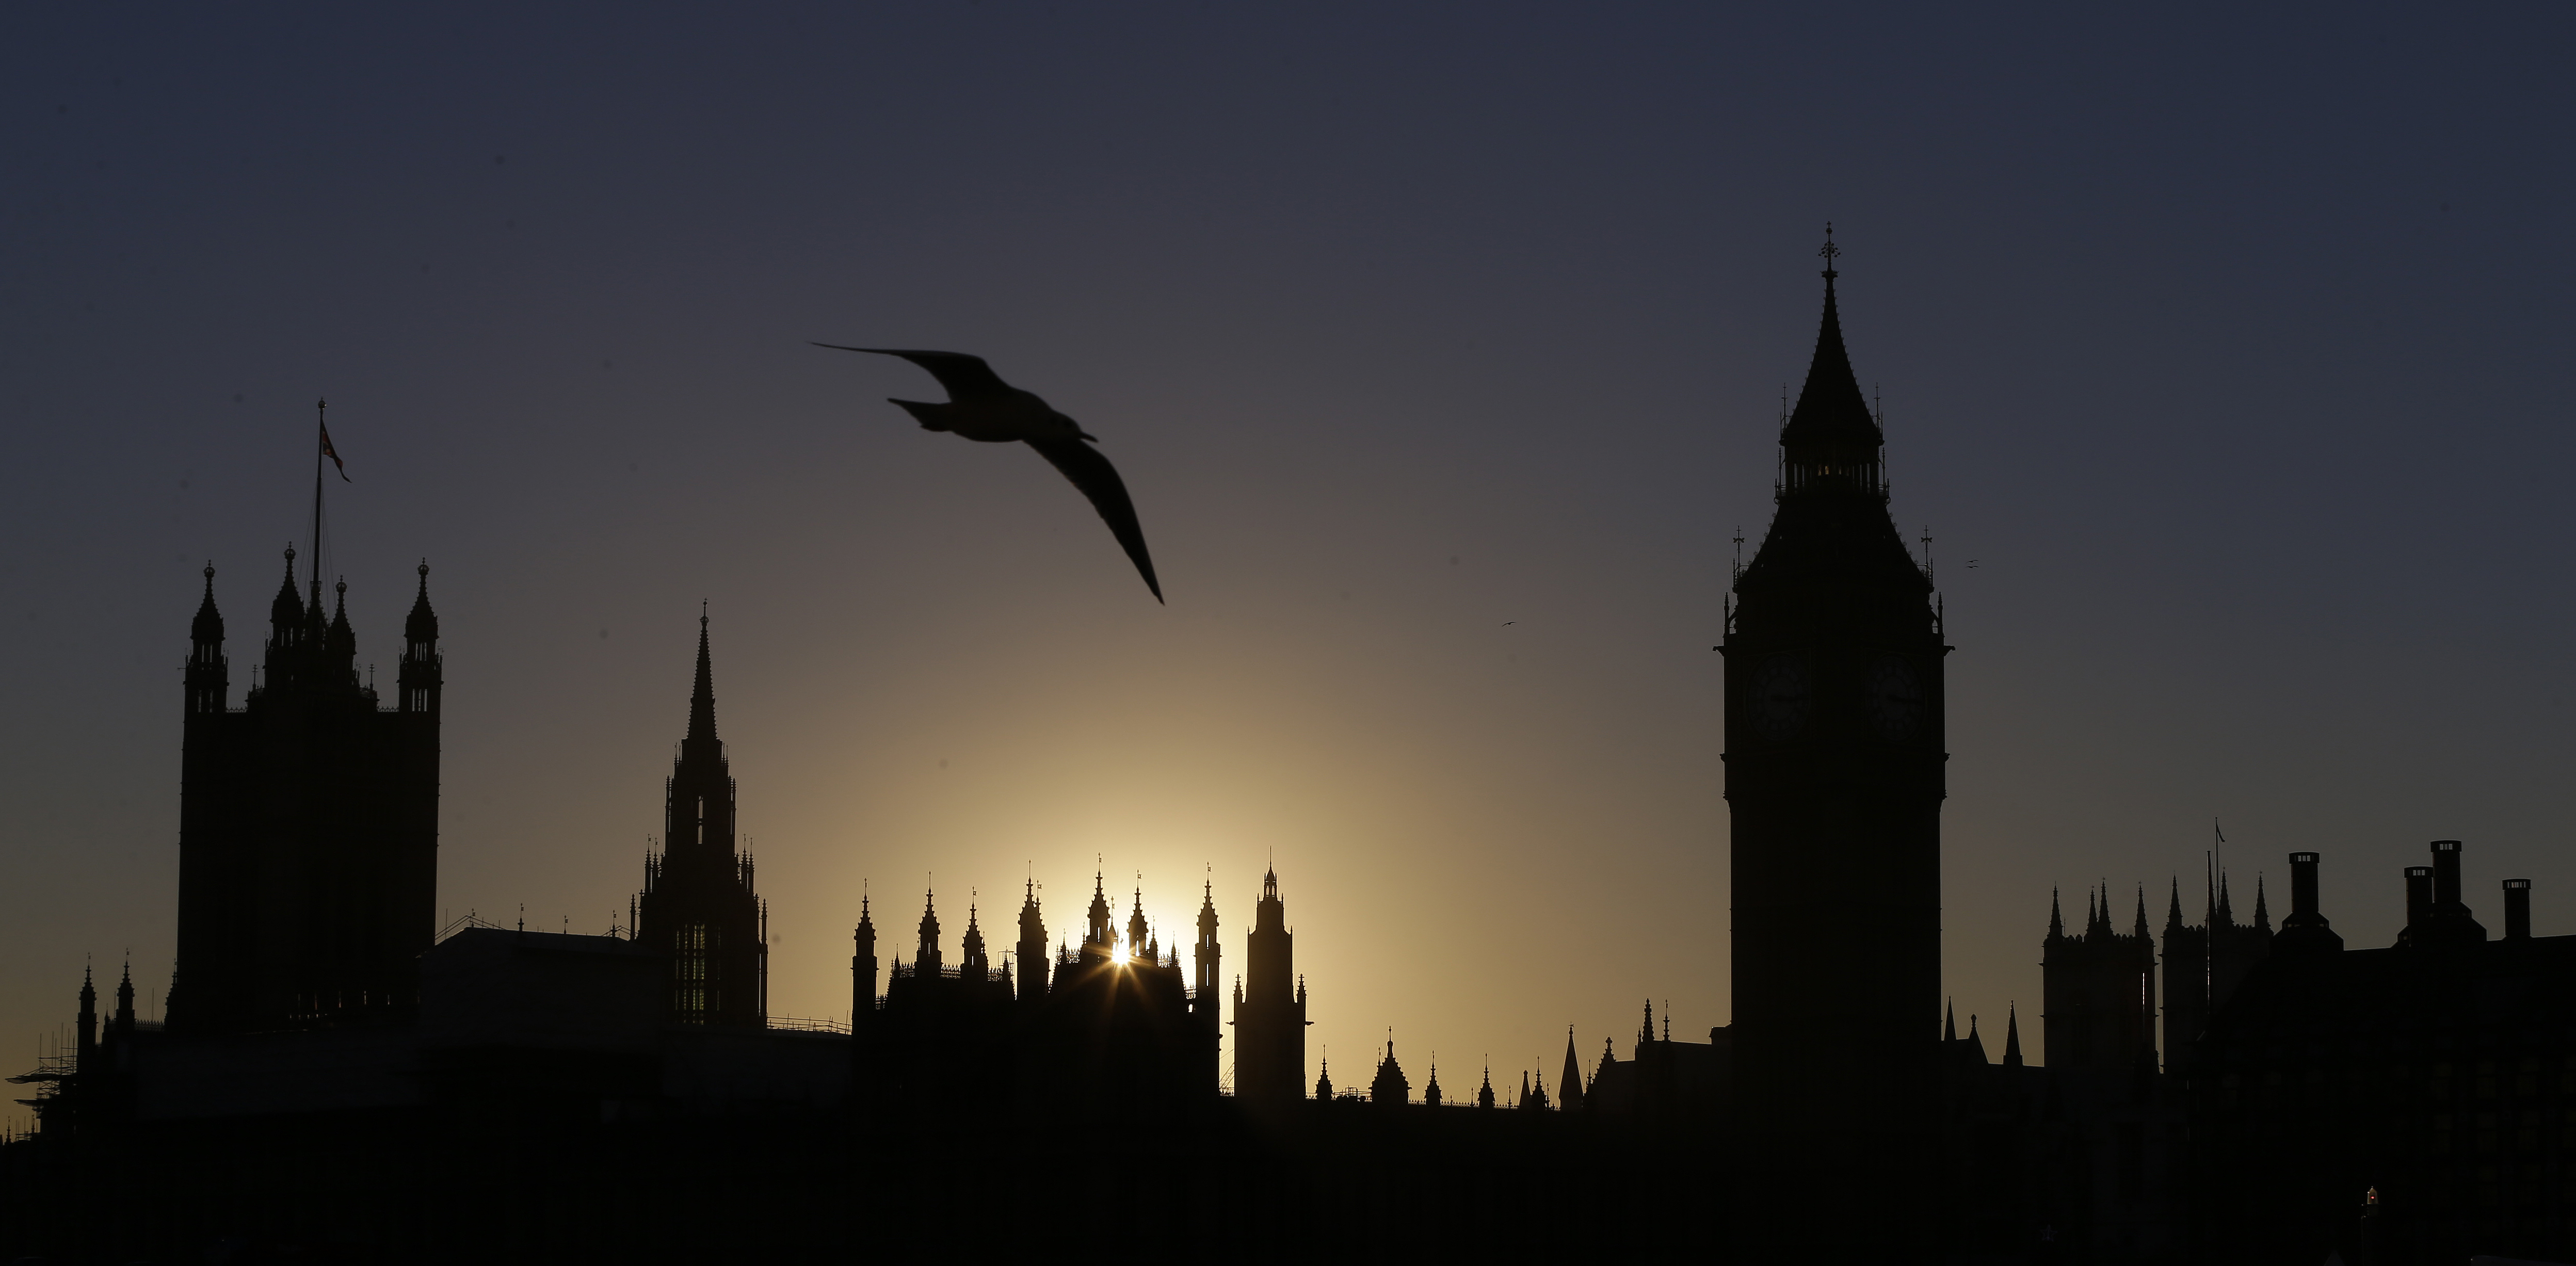 A seagull flies on the south bank of the River Thames, across the river from the Palace of Westminster, and the Elizabeth Tower which contains the ball known as Big Ben, as the sun sets in London, Tuesday, Nov. 29, 2016. (AP Photo/Alastair Grant)